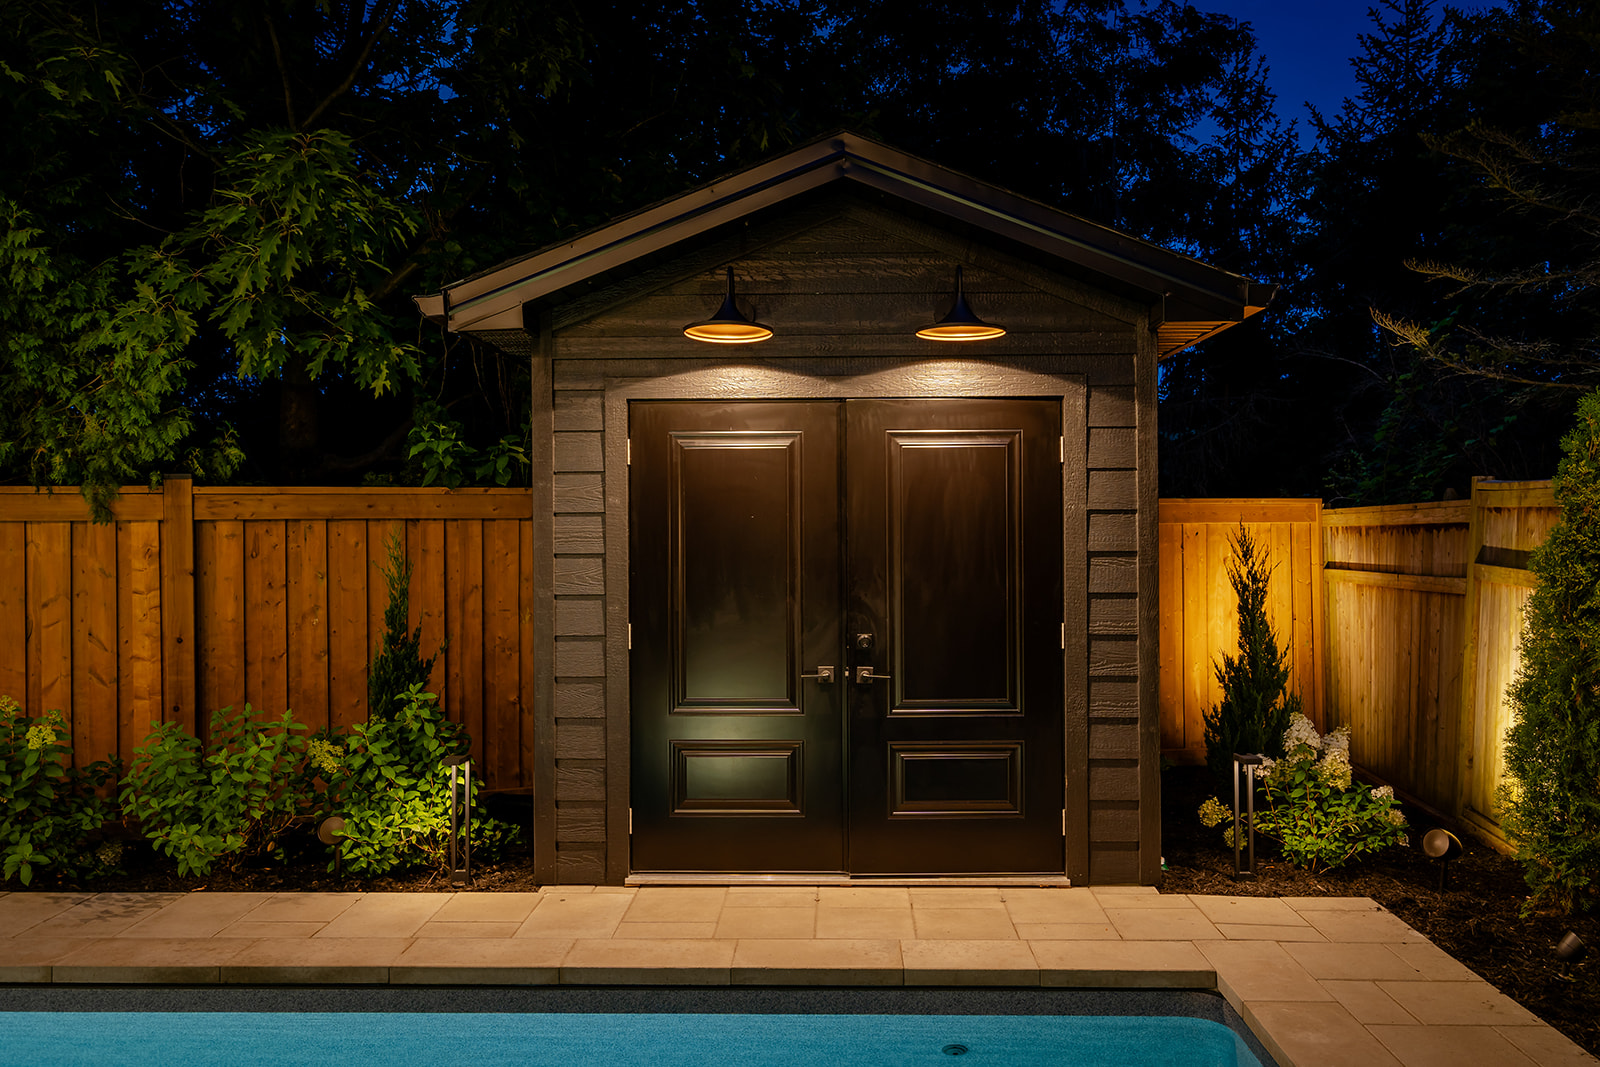 A pool house with lights on.